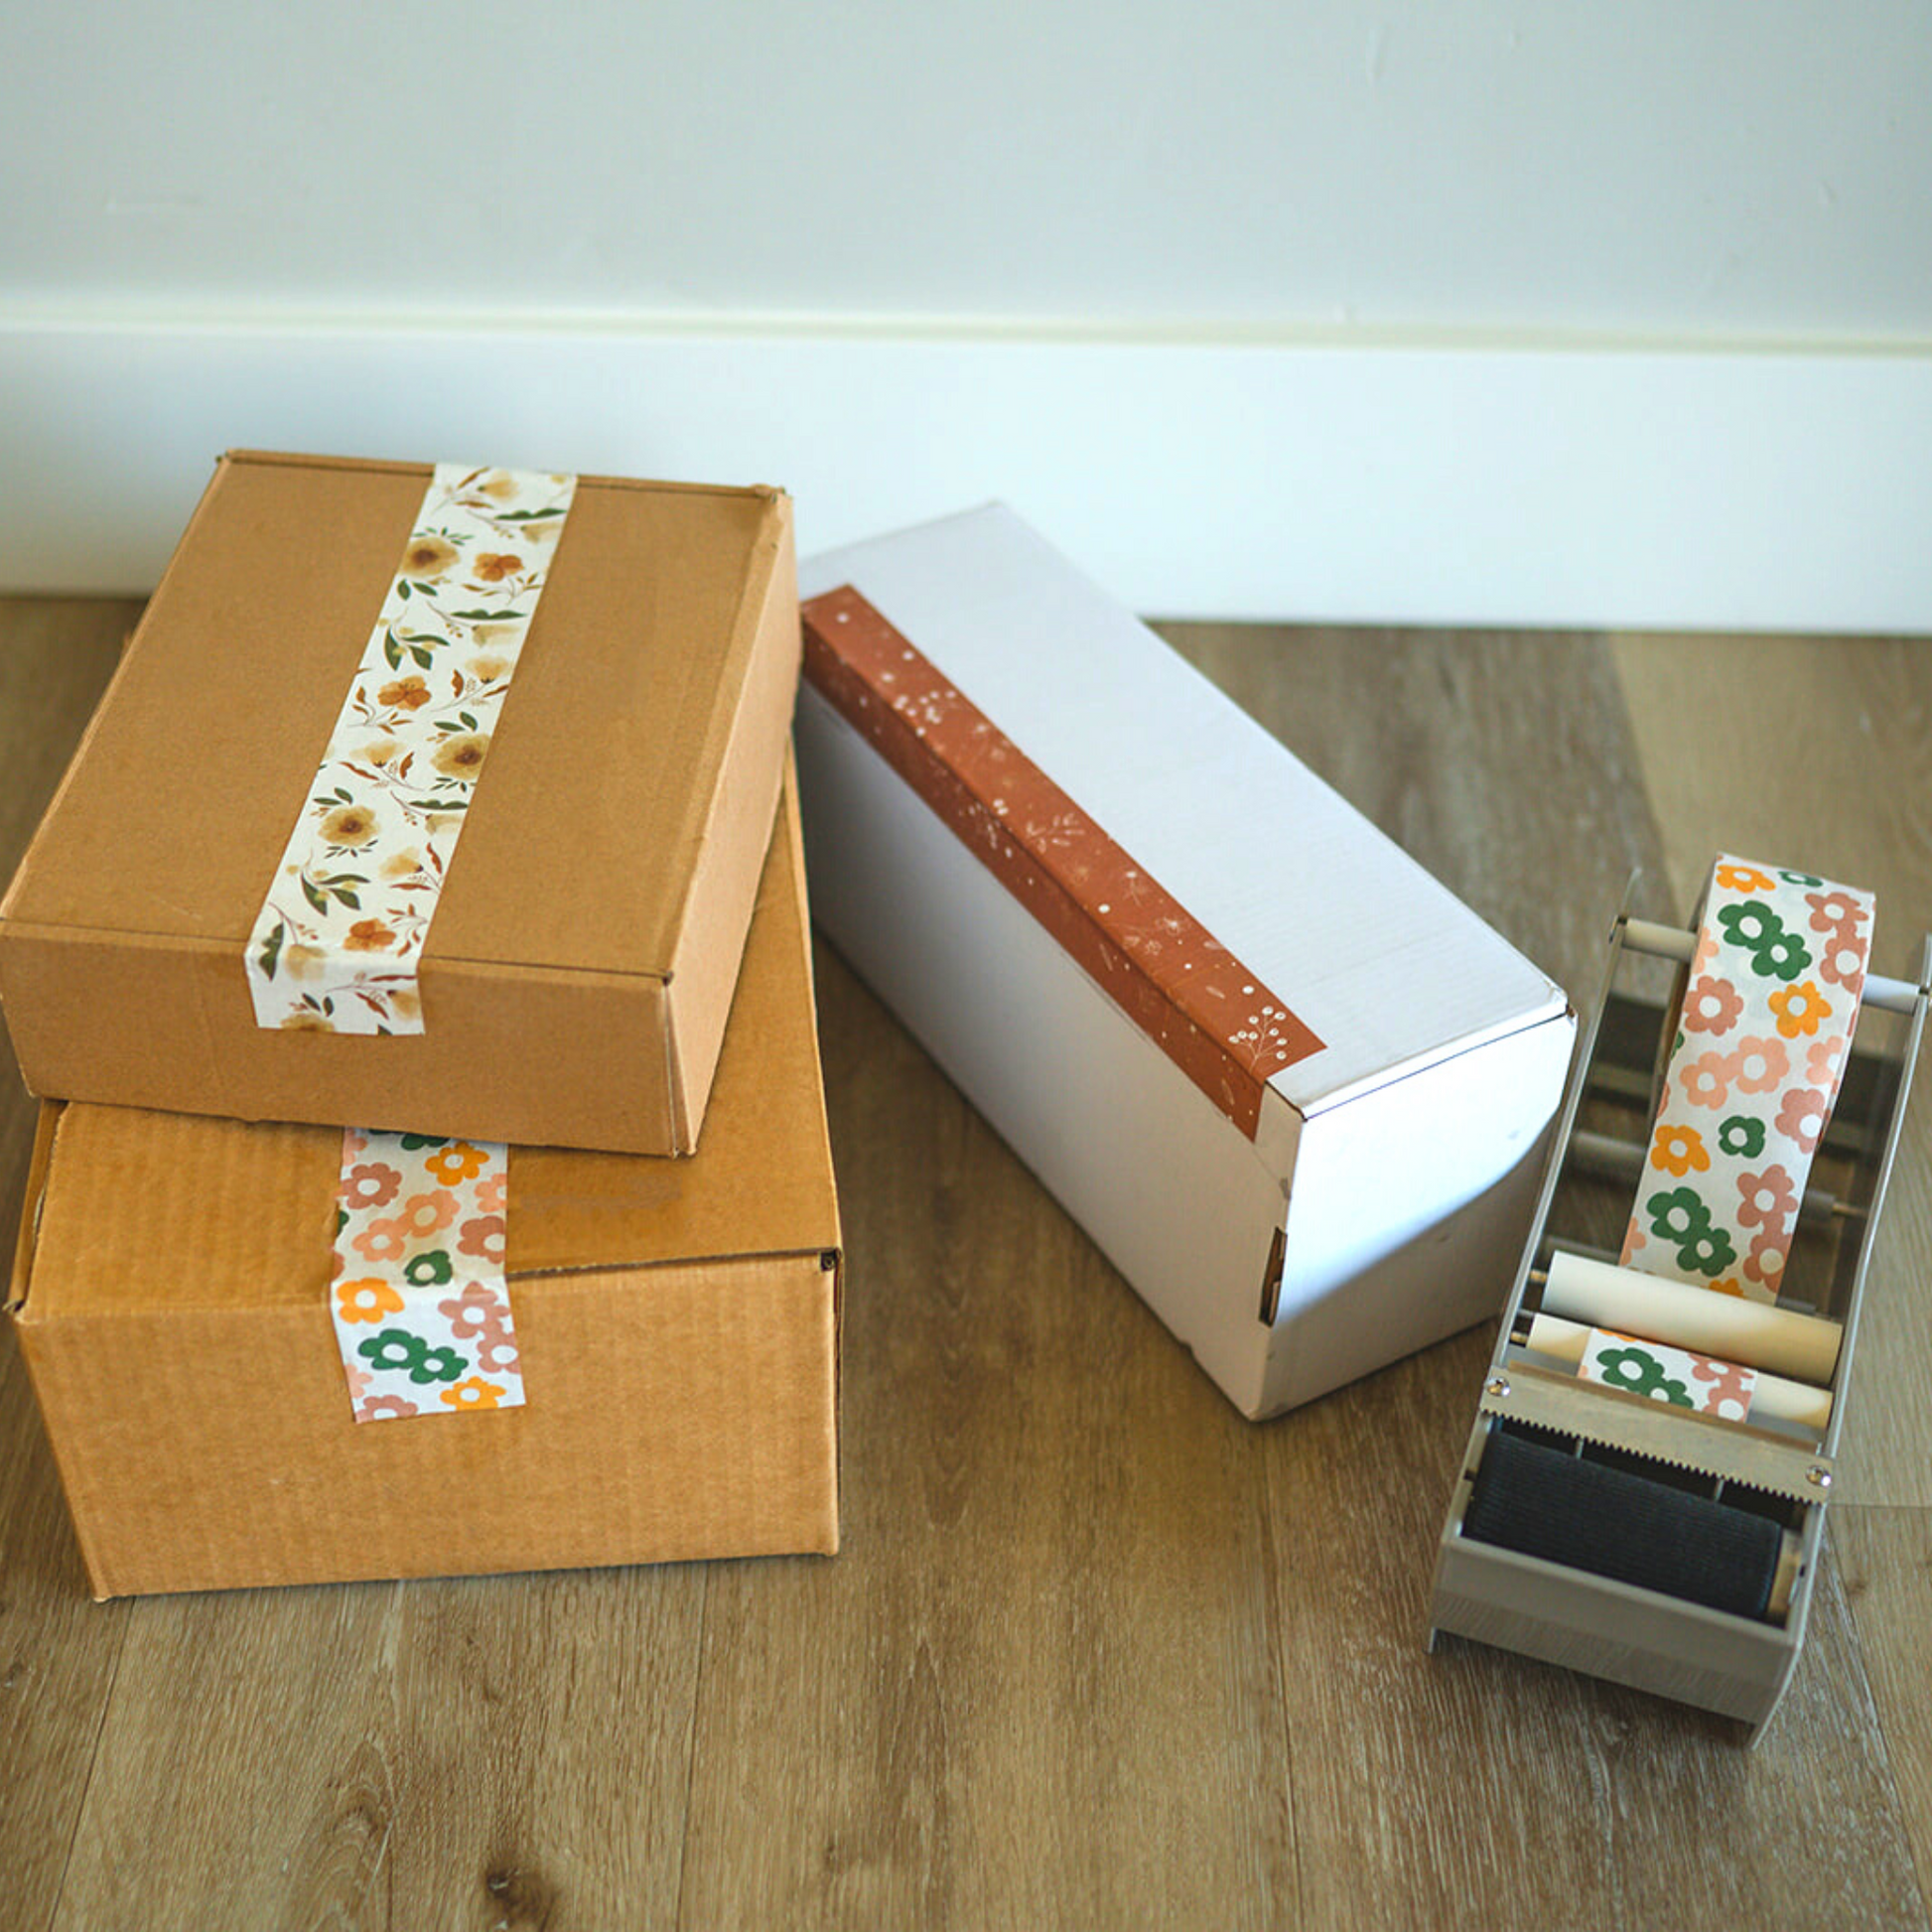 Boxes with Daisy Multi tape dispenser.